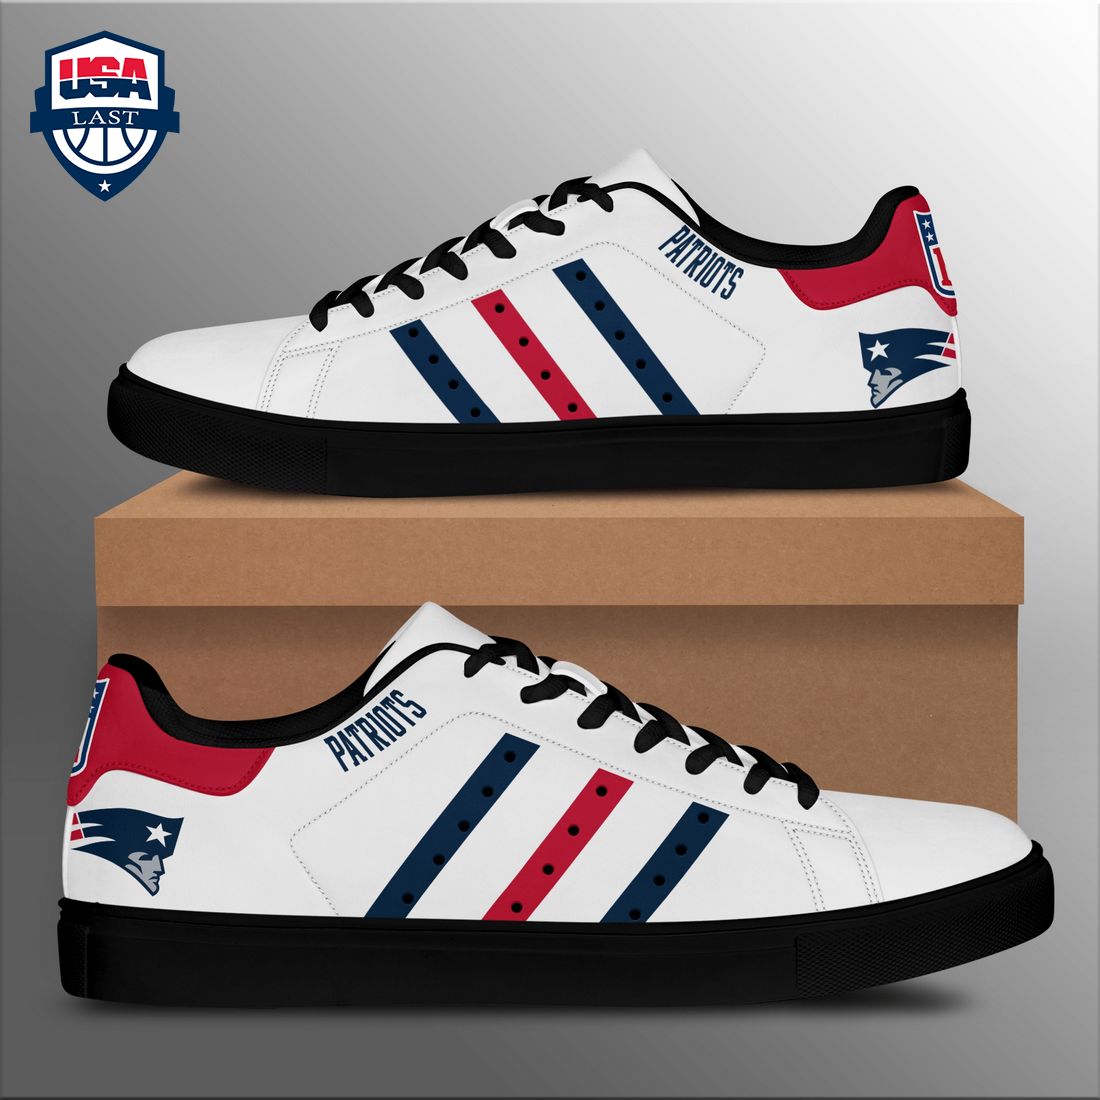 new-england-patriots-navy-red-stripes-stan-smith-low-top-shoes-1-uDEBK.jpg